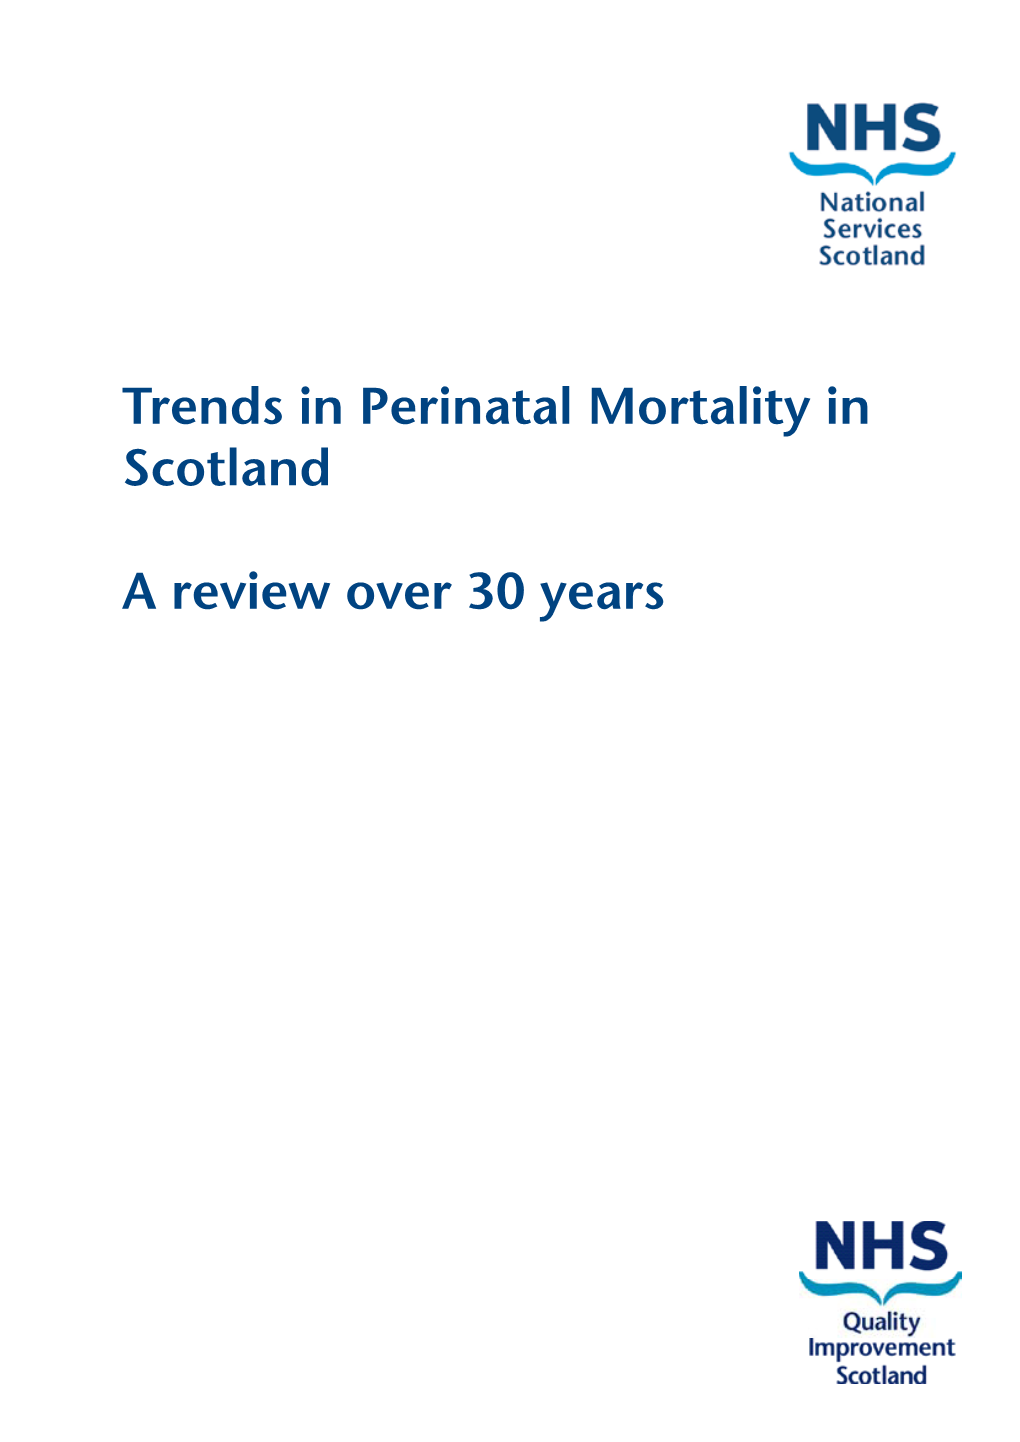 Trends in Perinatal Mortality in Scotland a Review Over 30 Years